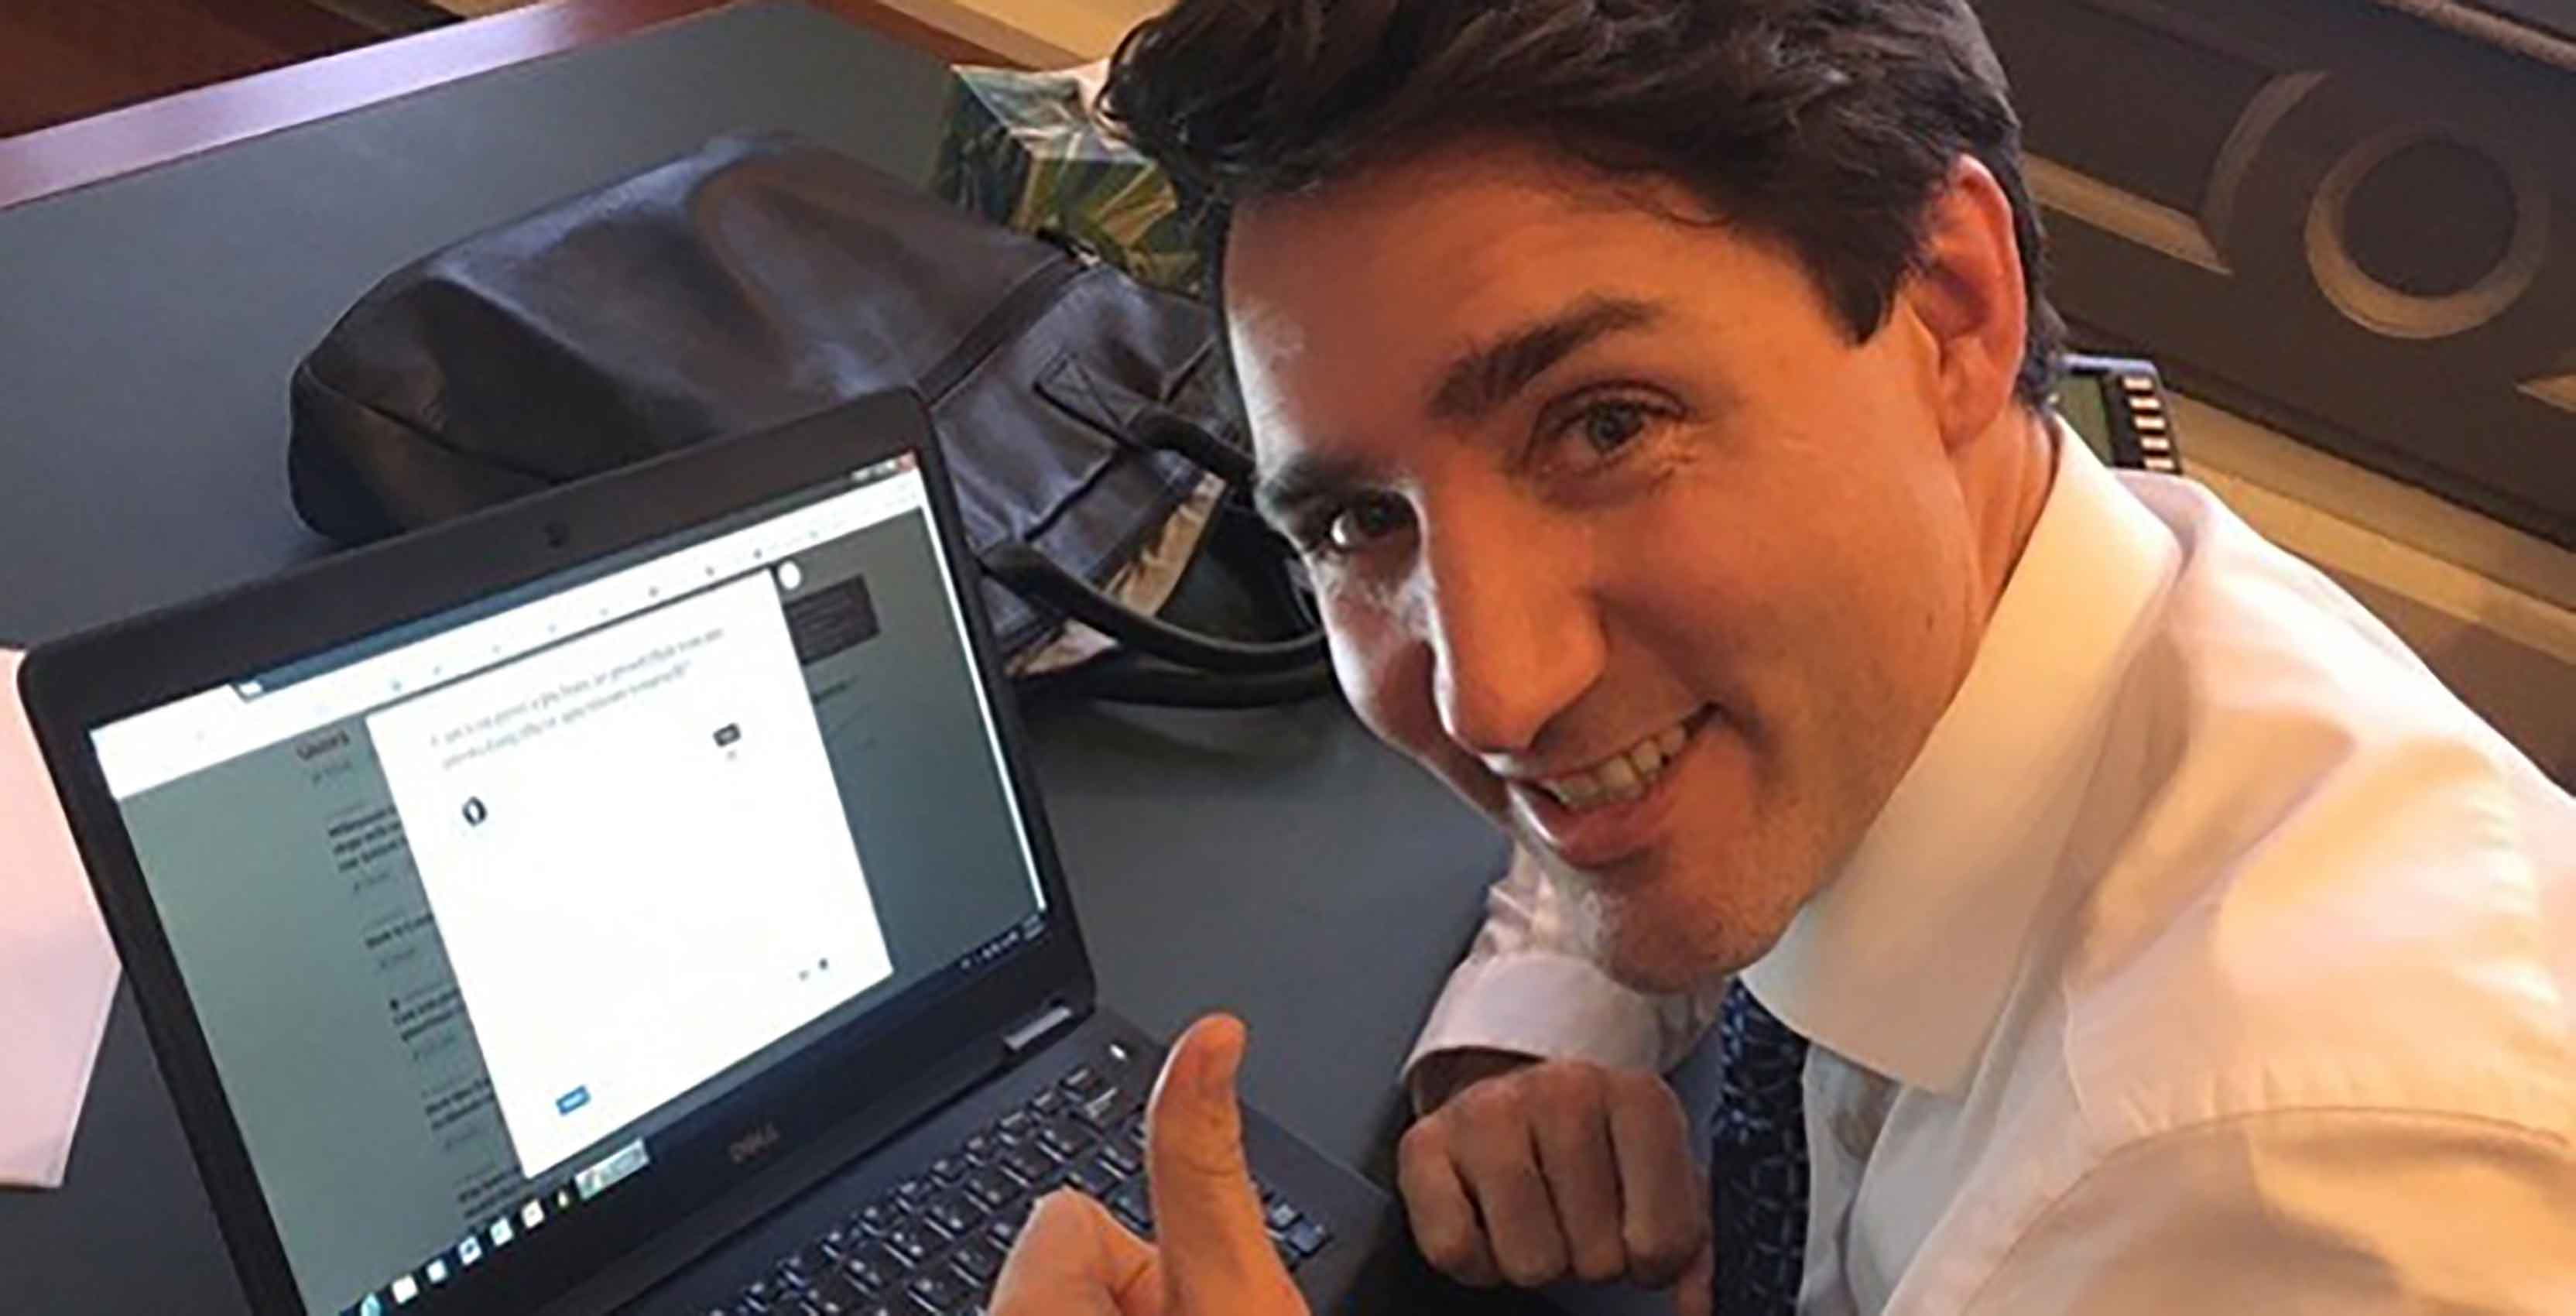 trudeau with his thumbs up beside a laptop.